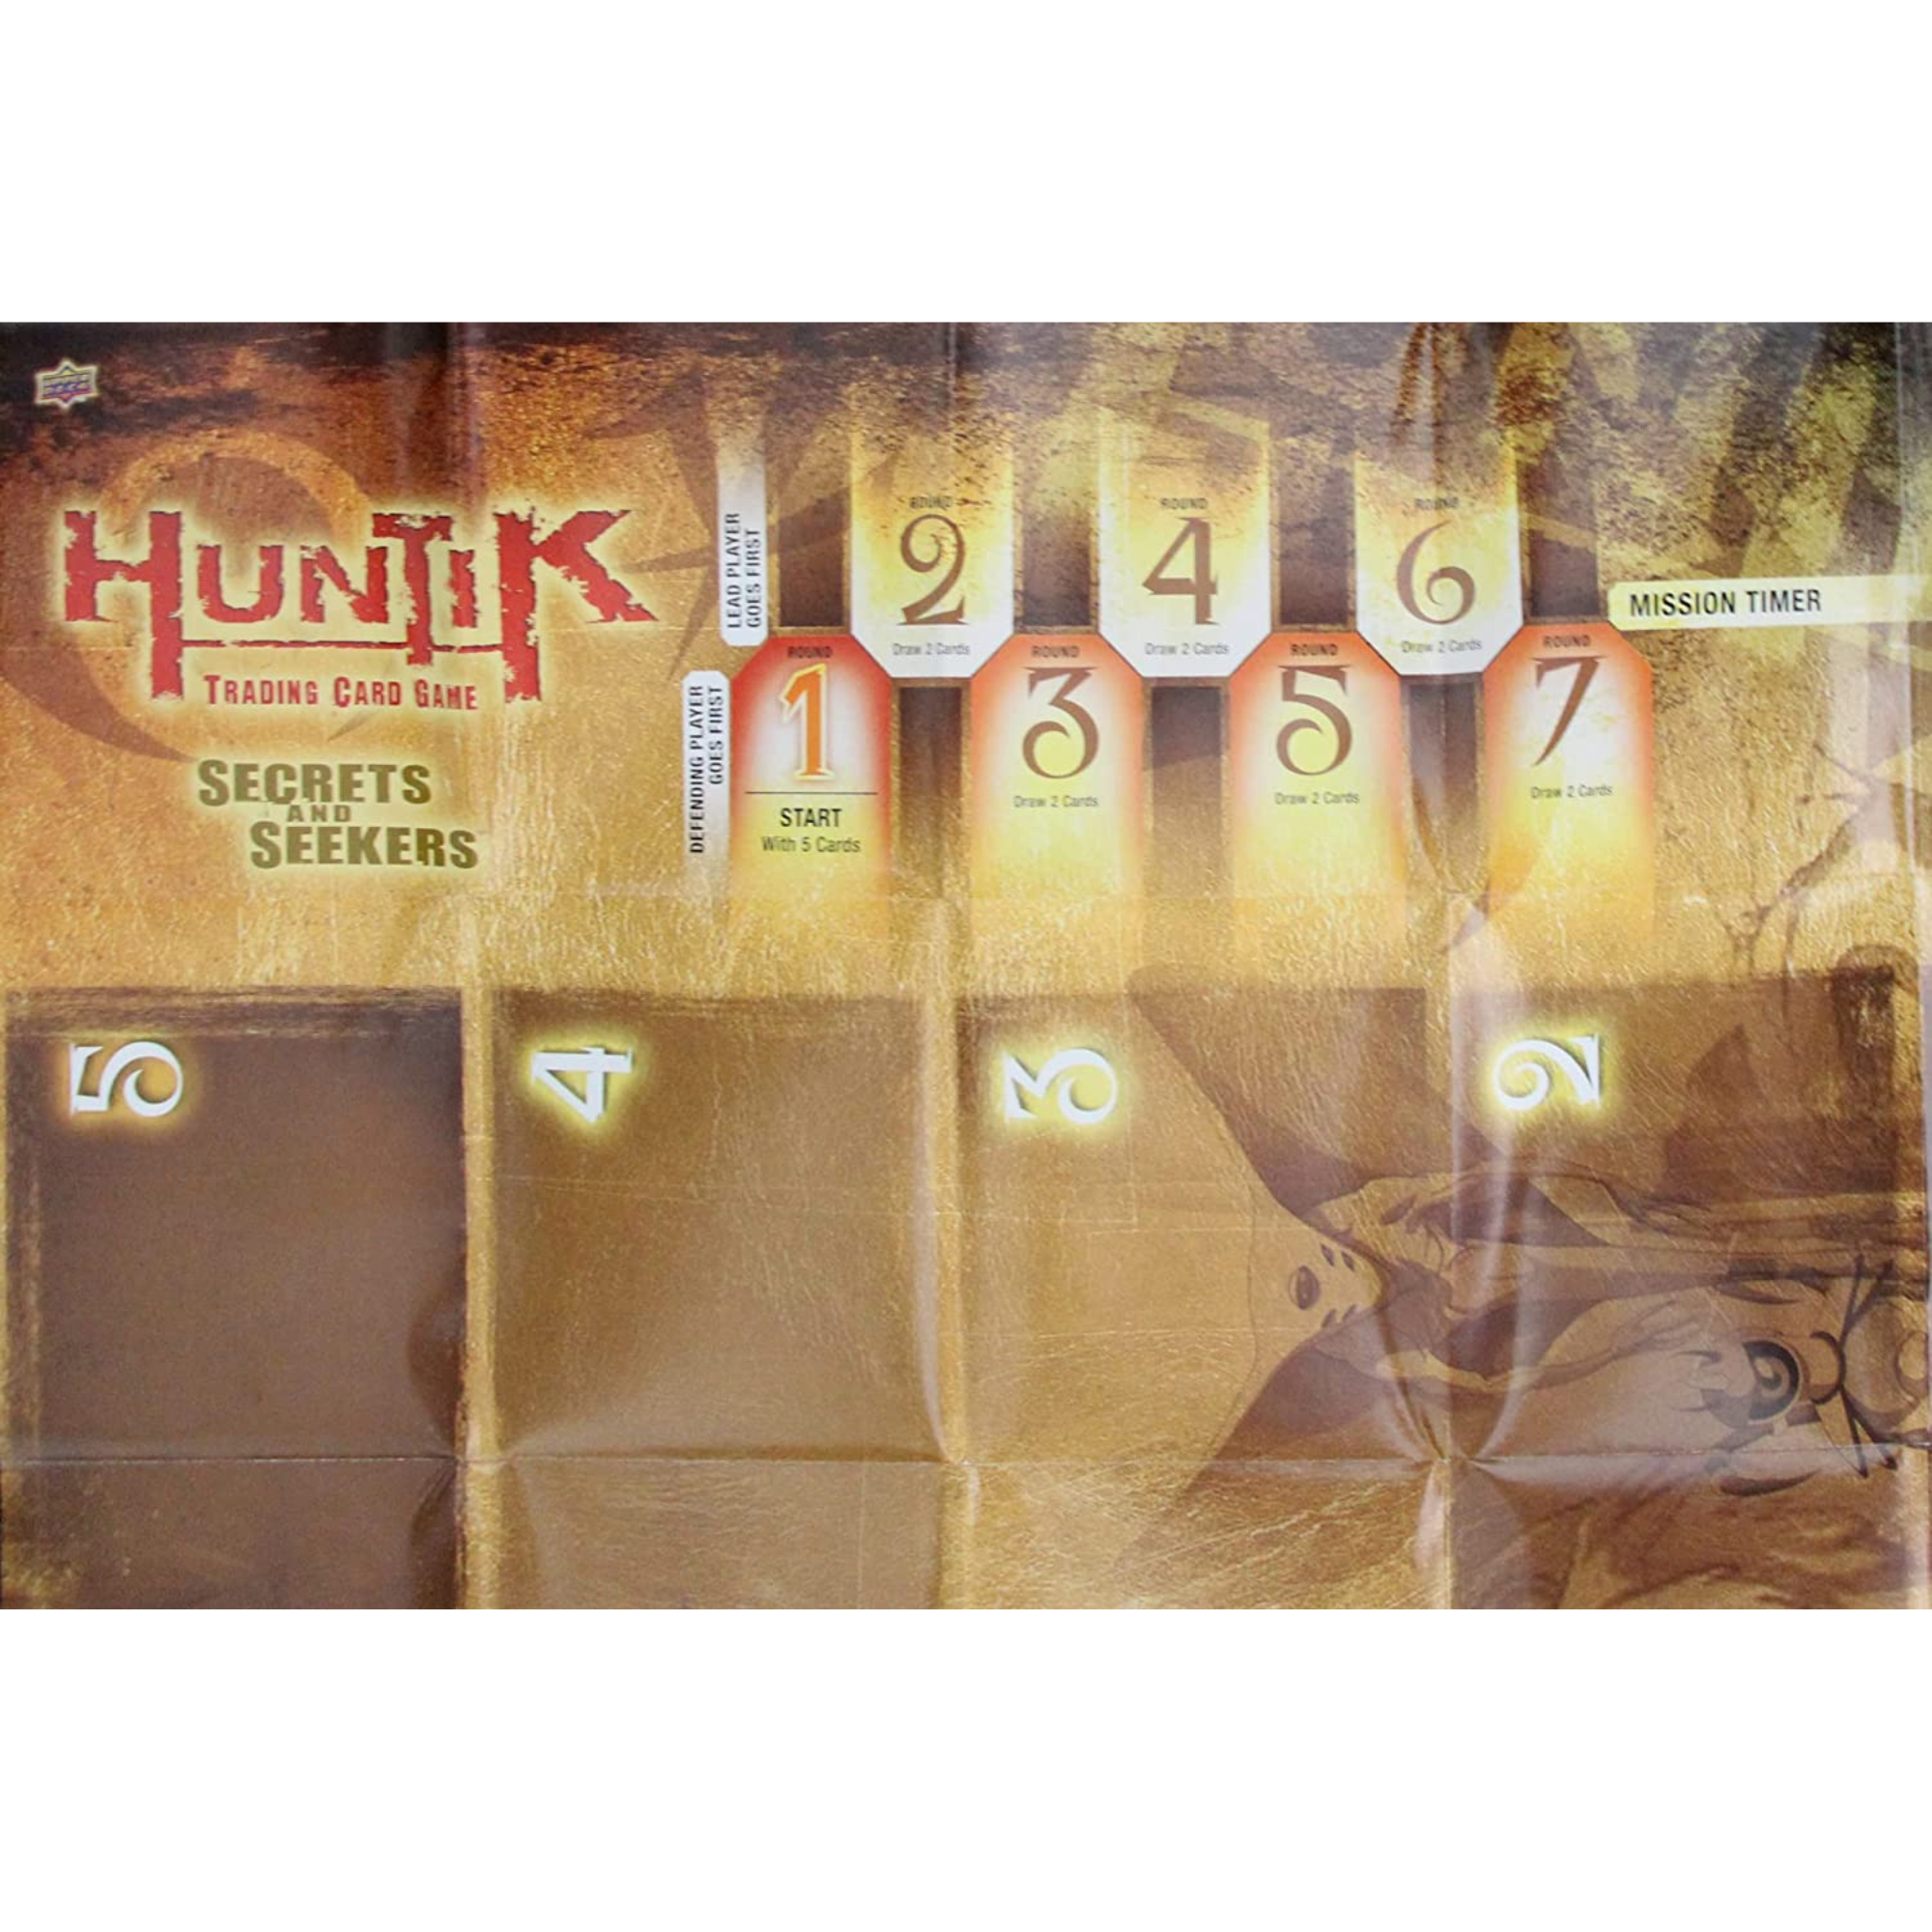 Huntik Secrets & Seekers Collection Set with 33 Card Deck, Game Mat, Large T-Shirt and more! - Toptoys2u